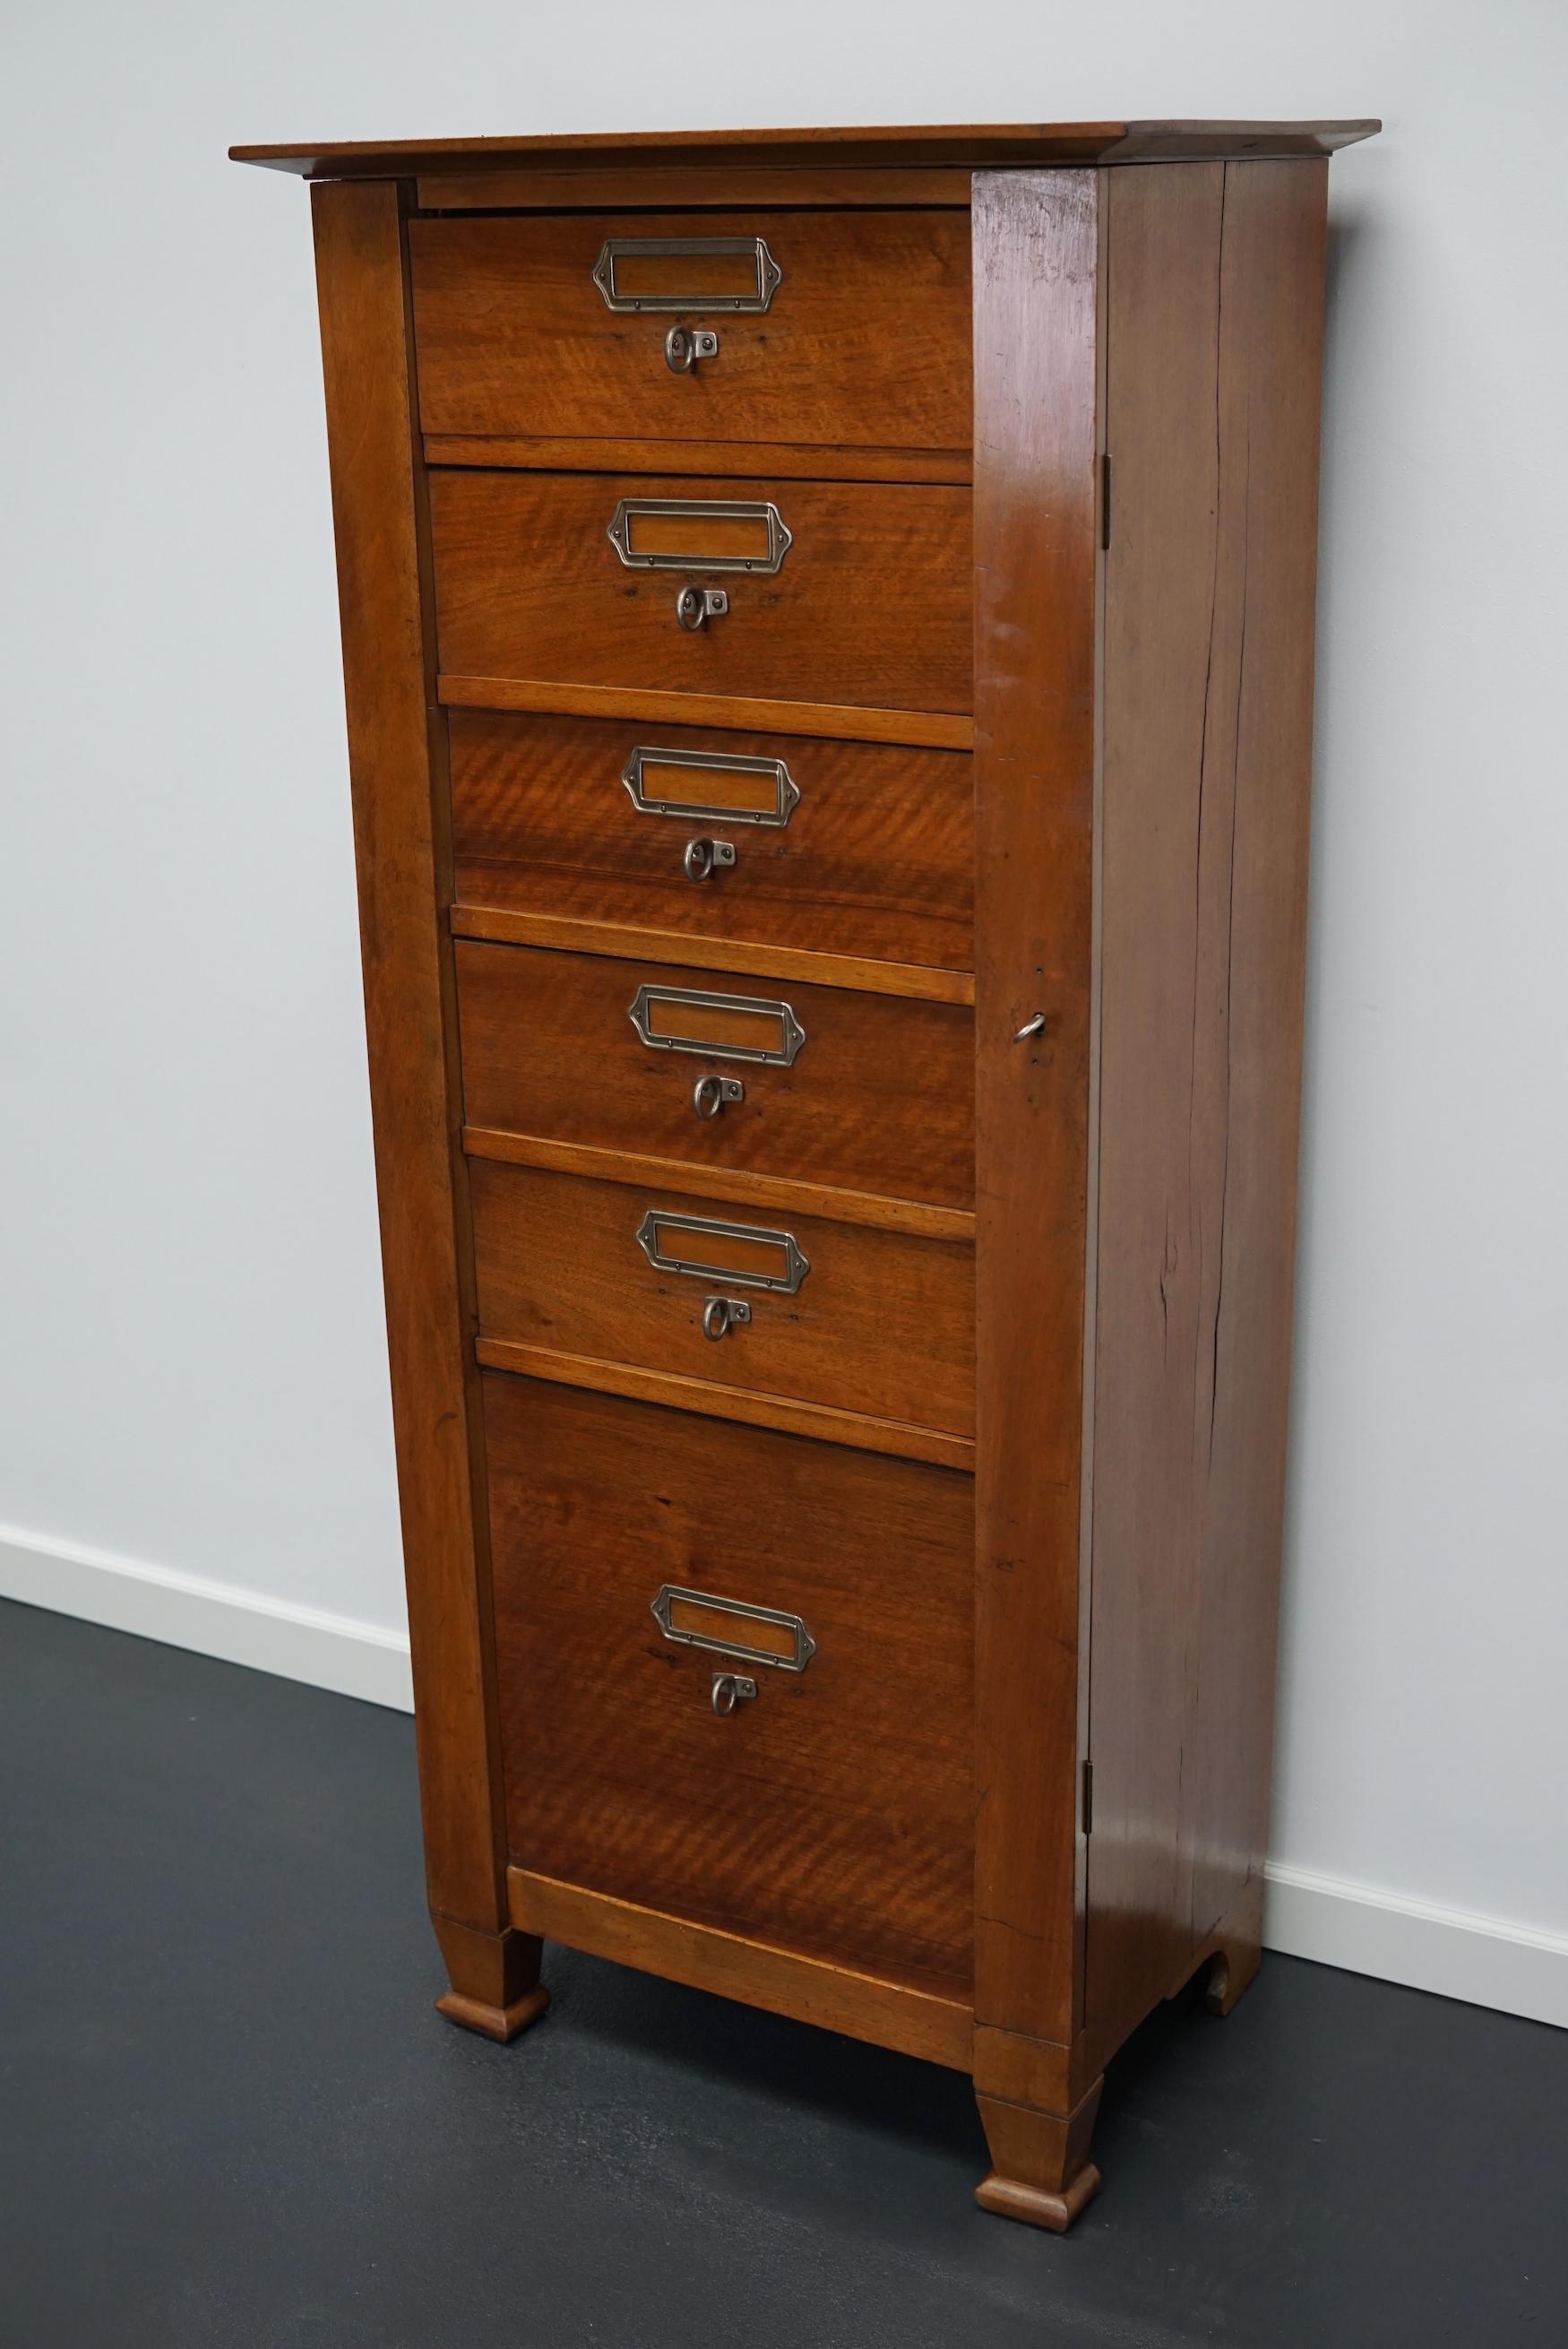 This vintage mahogany bank of drawers dates from the 1930s and was made in France. It features a mahogany frame, drawers with mahogany fronts and metal handles. The drawers can be locked. A small piece of the left back leg is missing.